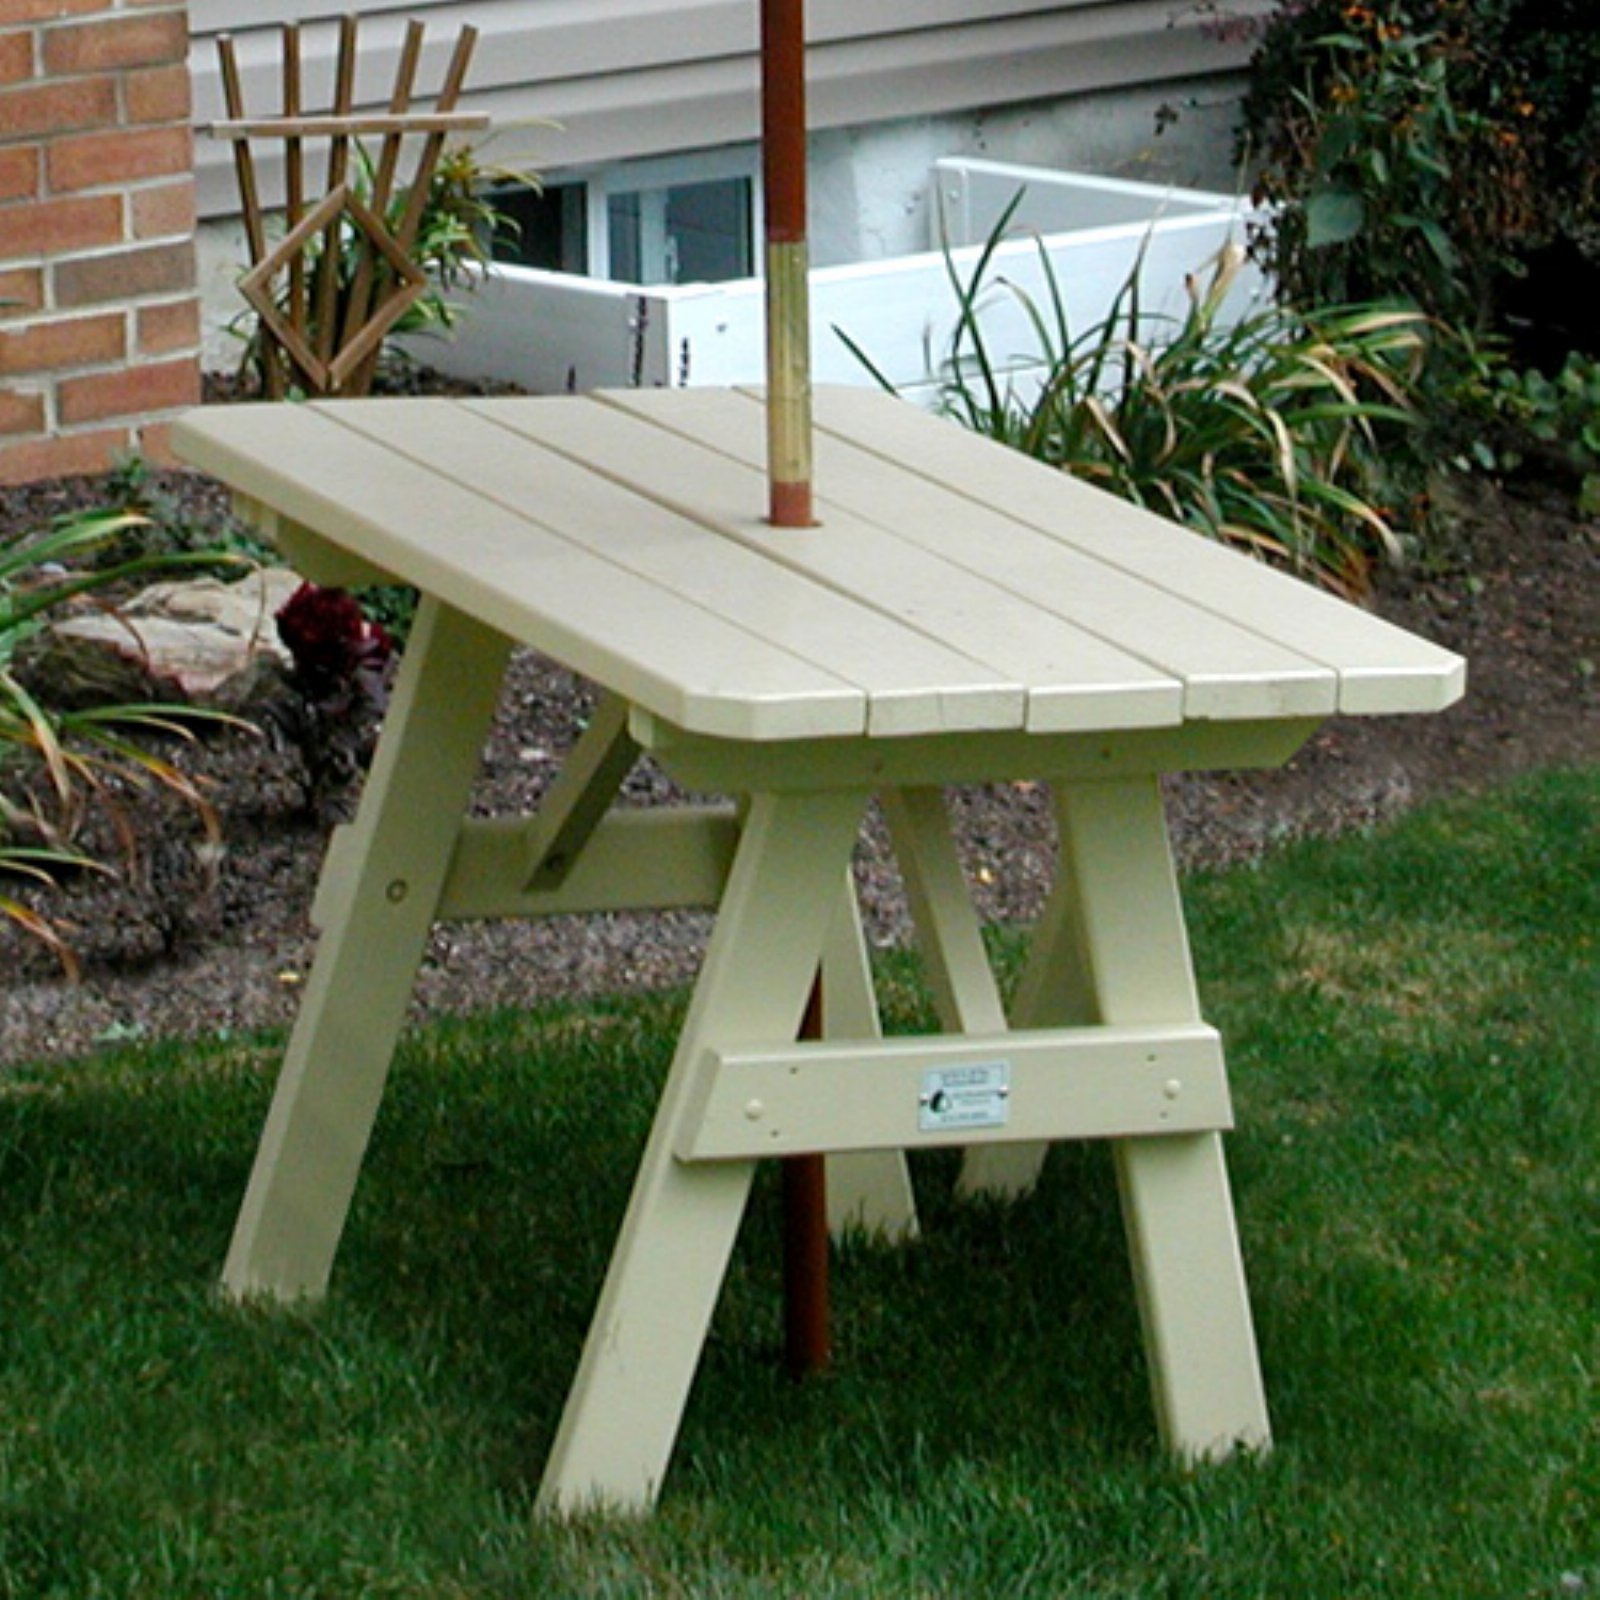 A &amp; L Furniture Yellow Pine Traditional Picnic Table - image 2 of 2